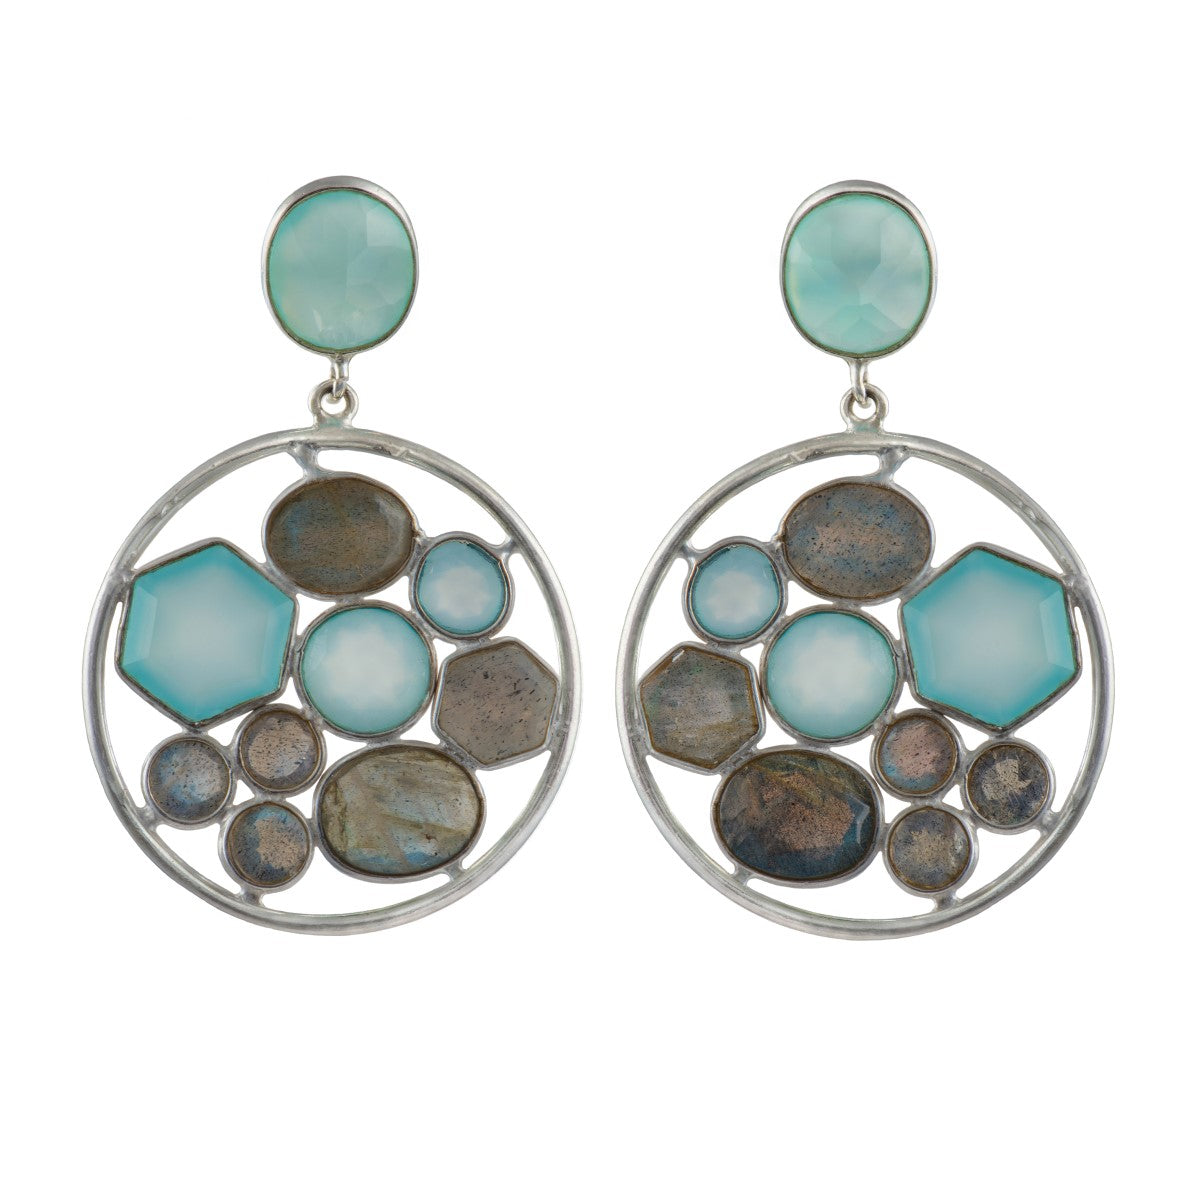 Long Gemstone Earrings with a Round Disc Drop with Stones in Sterling Silver - Aqua Chalcedony and Labradorite